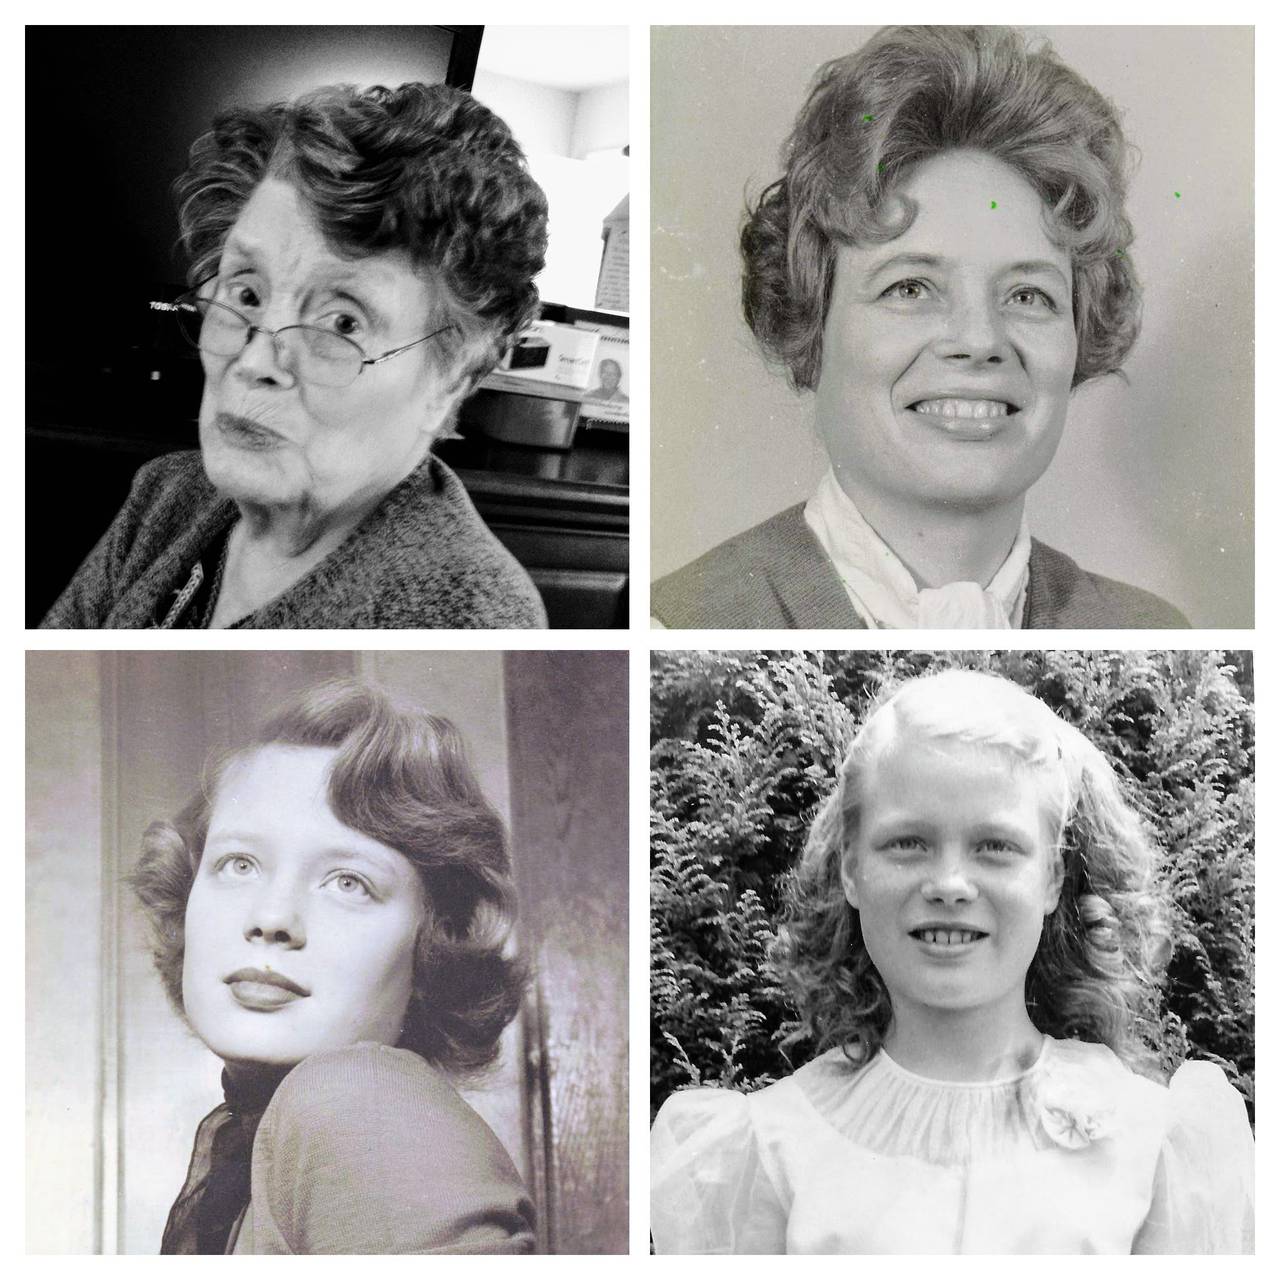 My mom at various points in her life, as a young girl, a high school student, the mother of five and a woman facing Alzheimer's Disease.